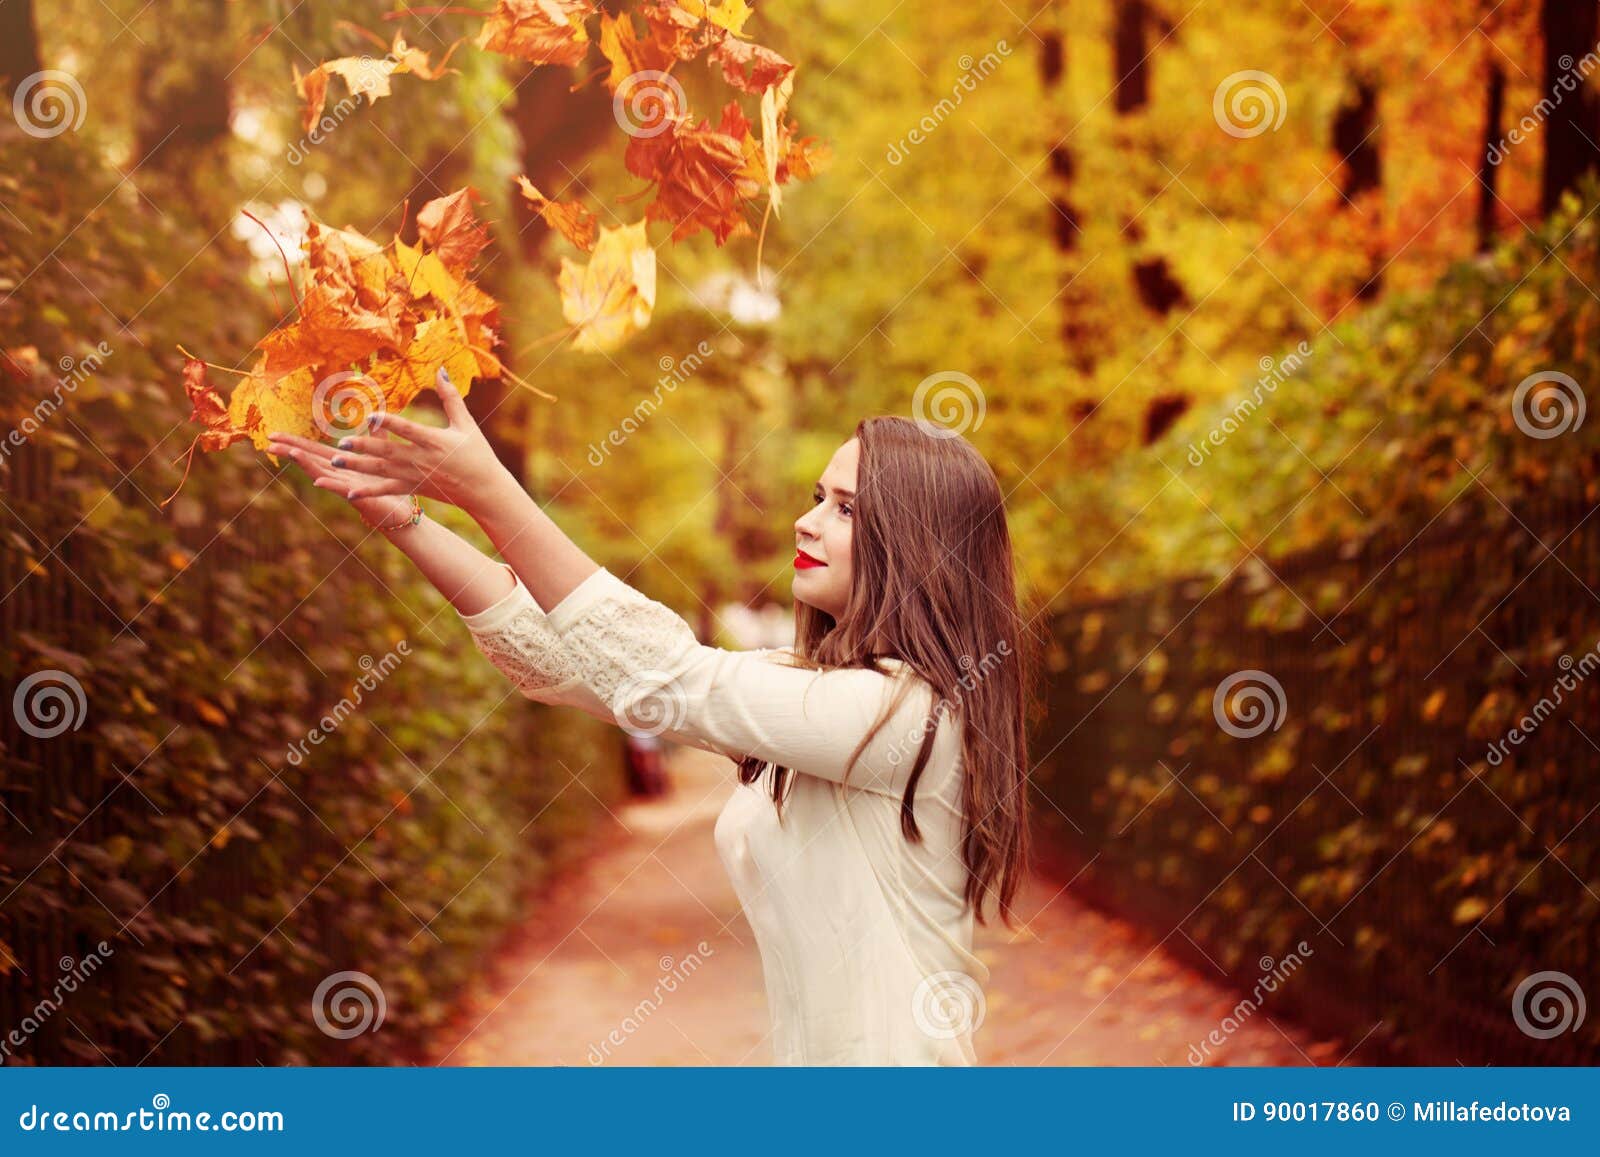 autumn woman outdoors. woman fasion model throwing up fal